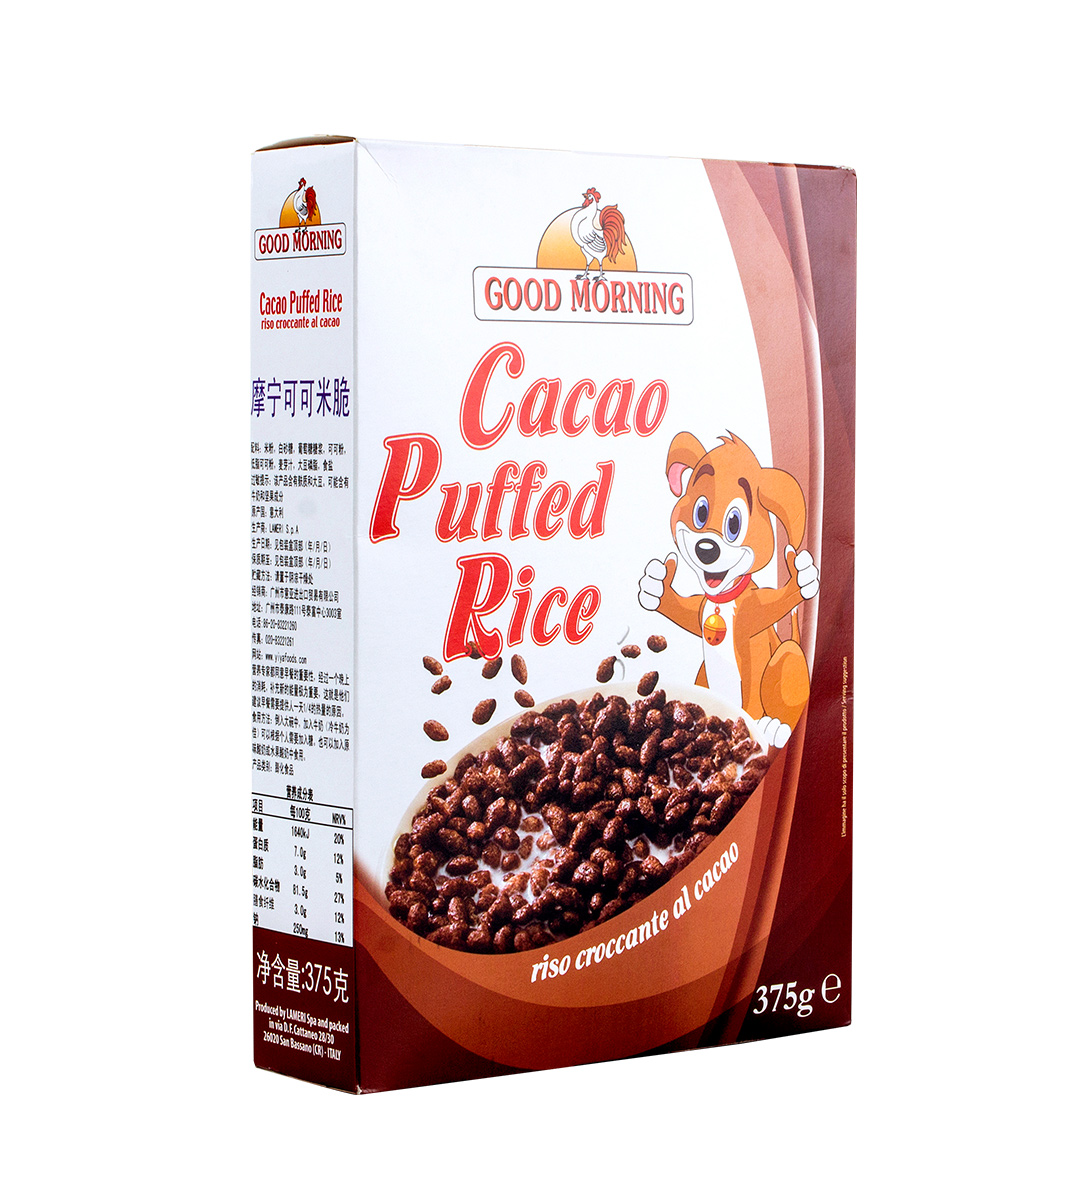 GOOD MORNING Cacao Puffed Rice 